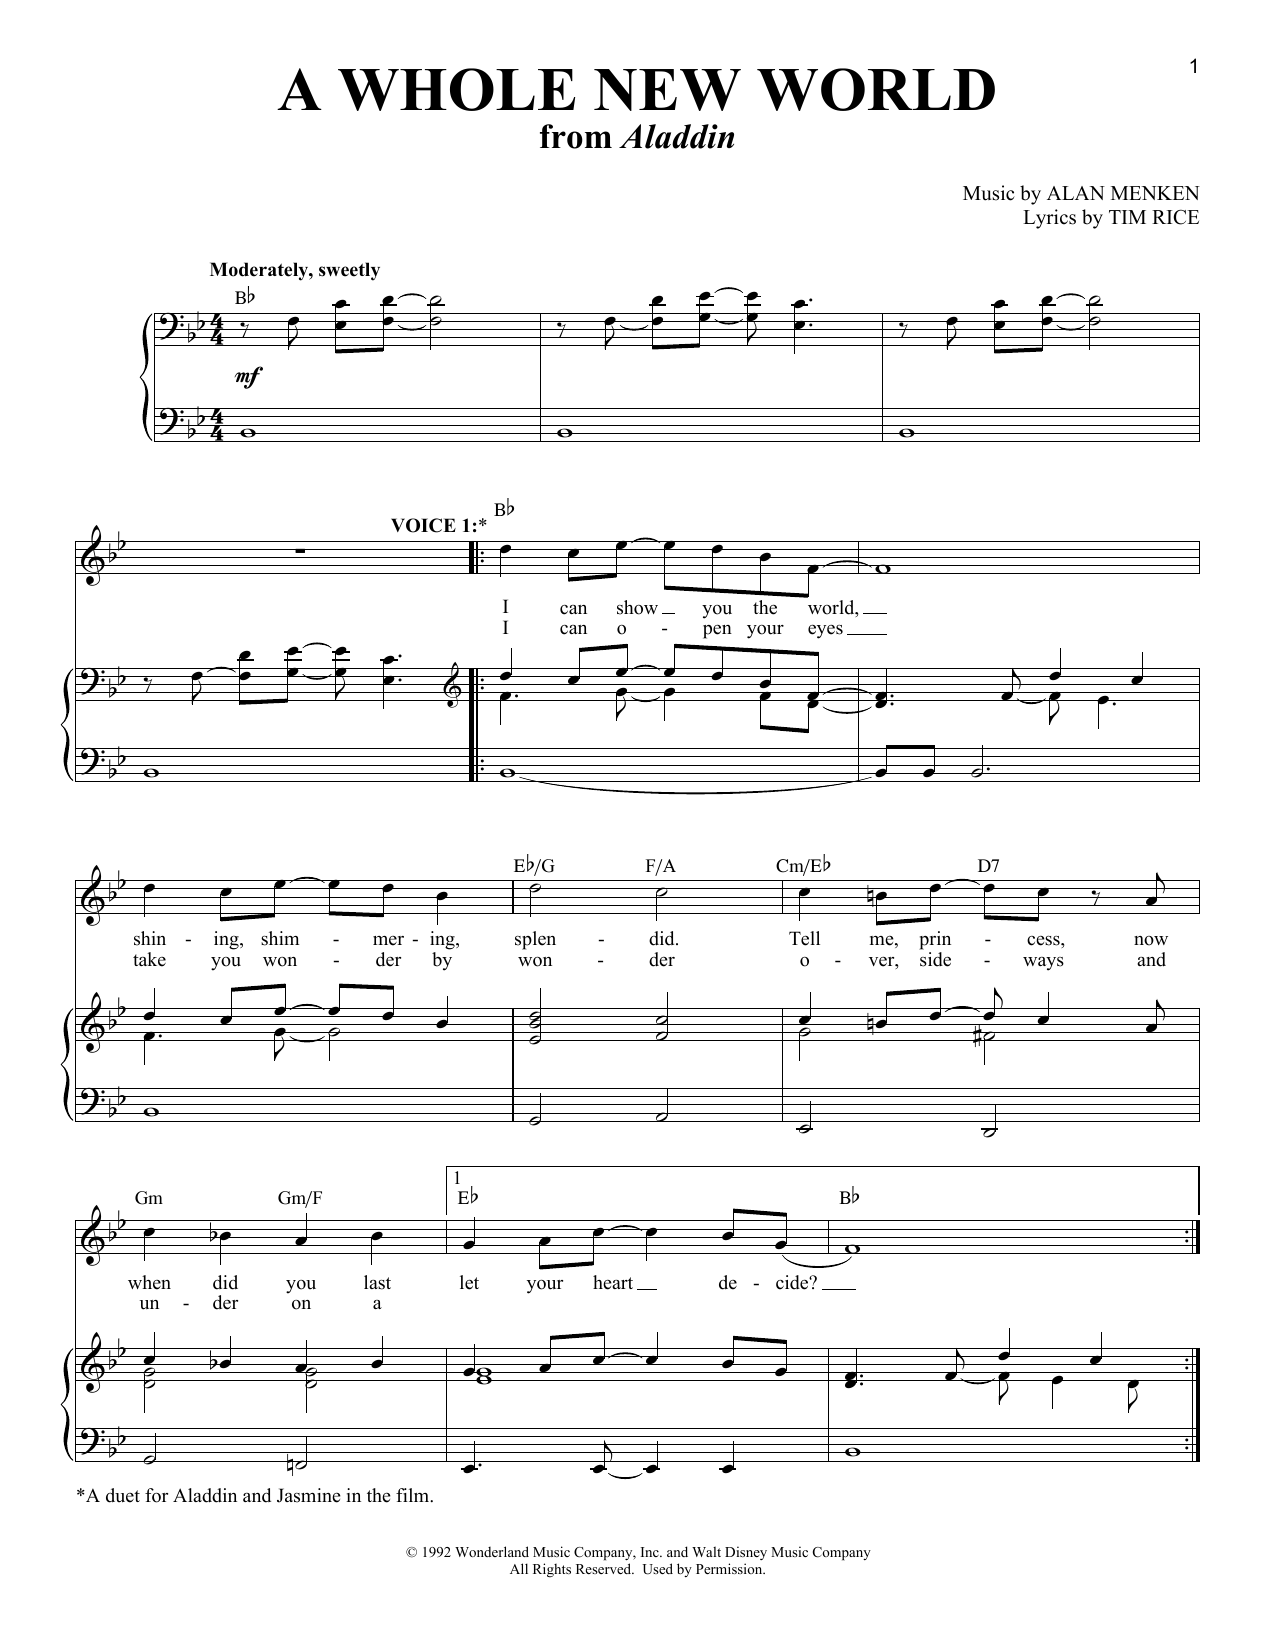 Download Peabo Bryson and Regina Belle A Whole New World (Aladdin's Theme) Sheet Music